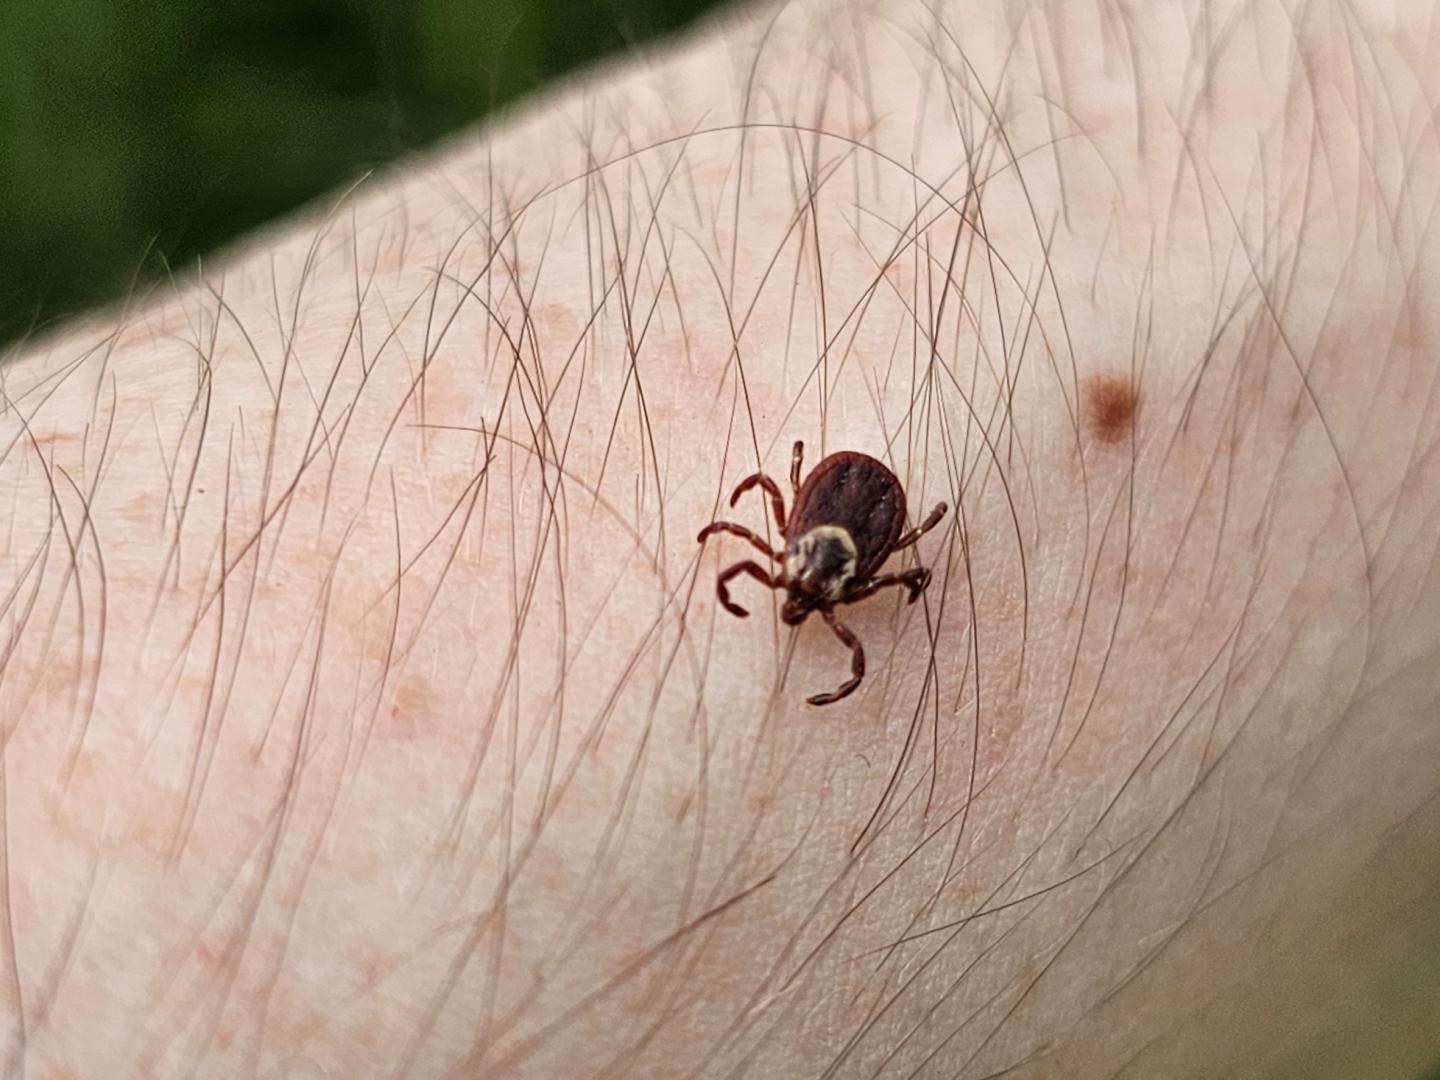 A tick on a person